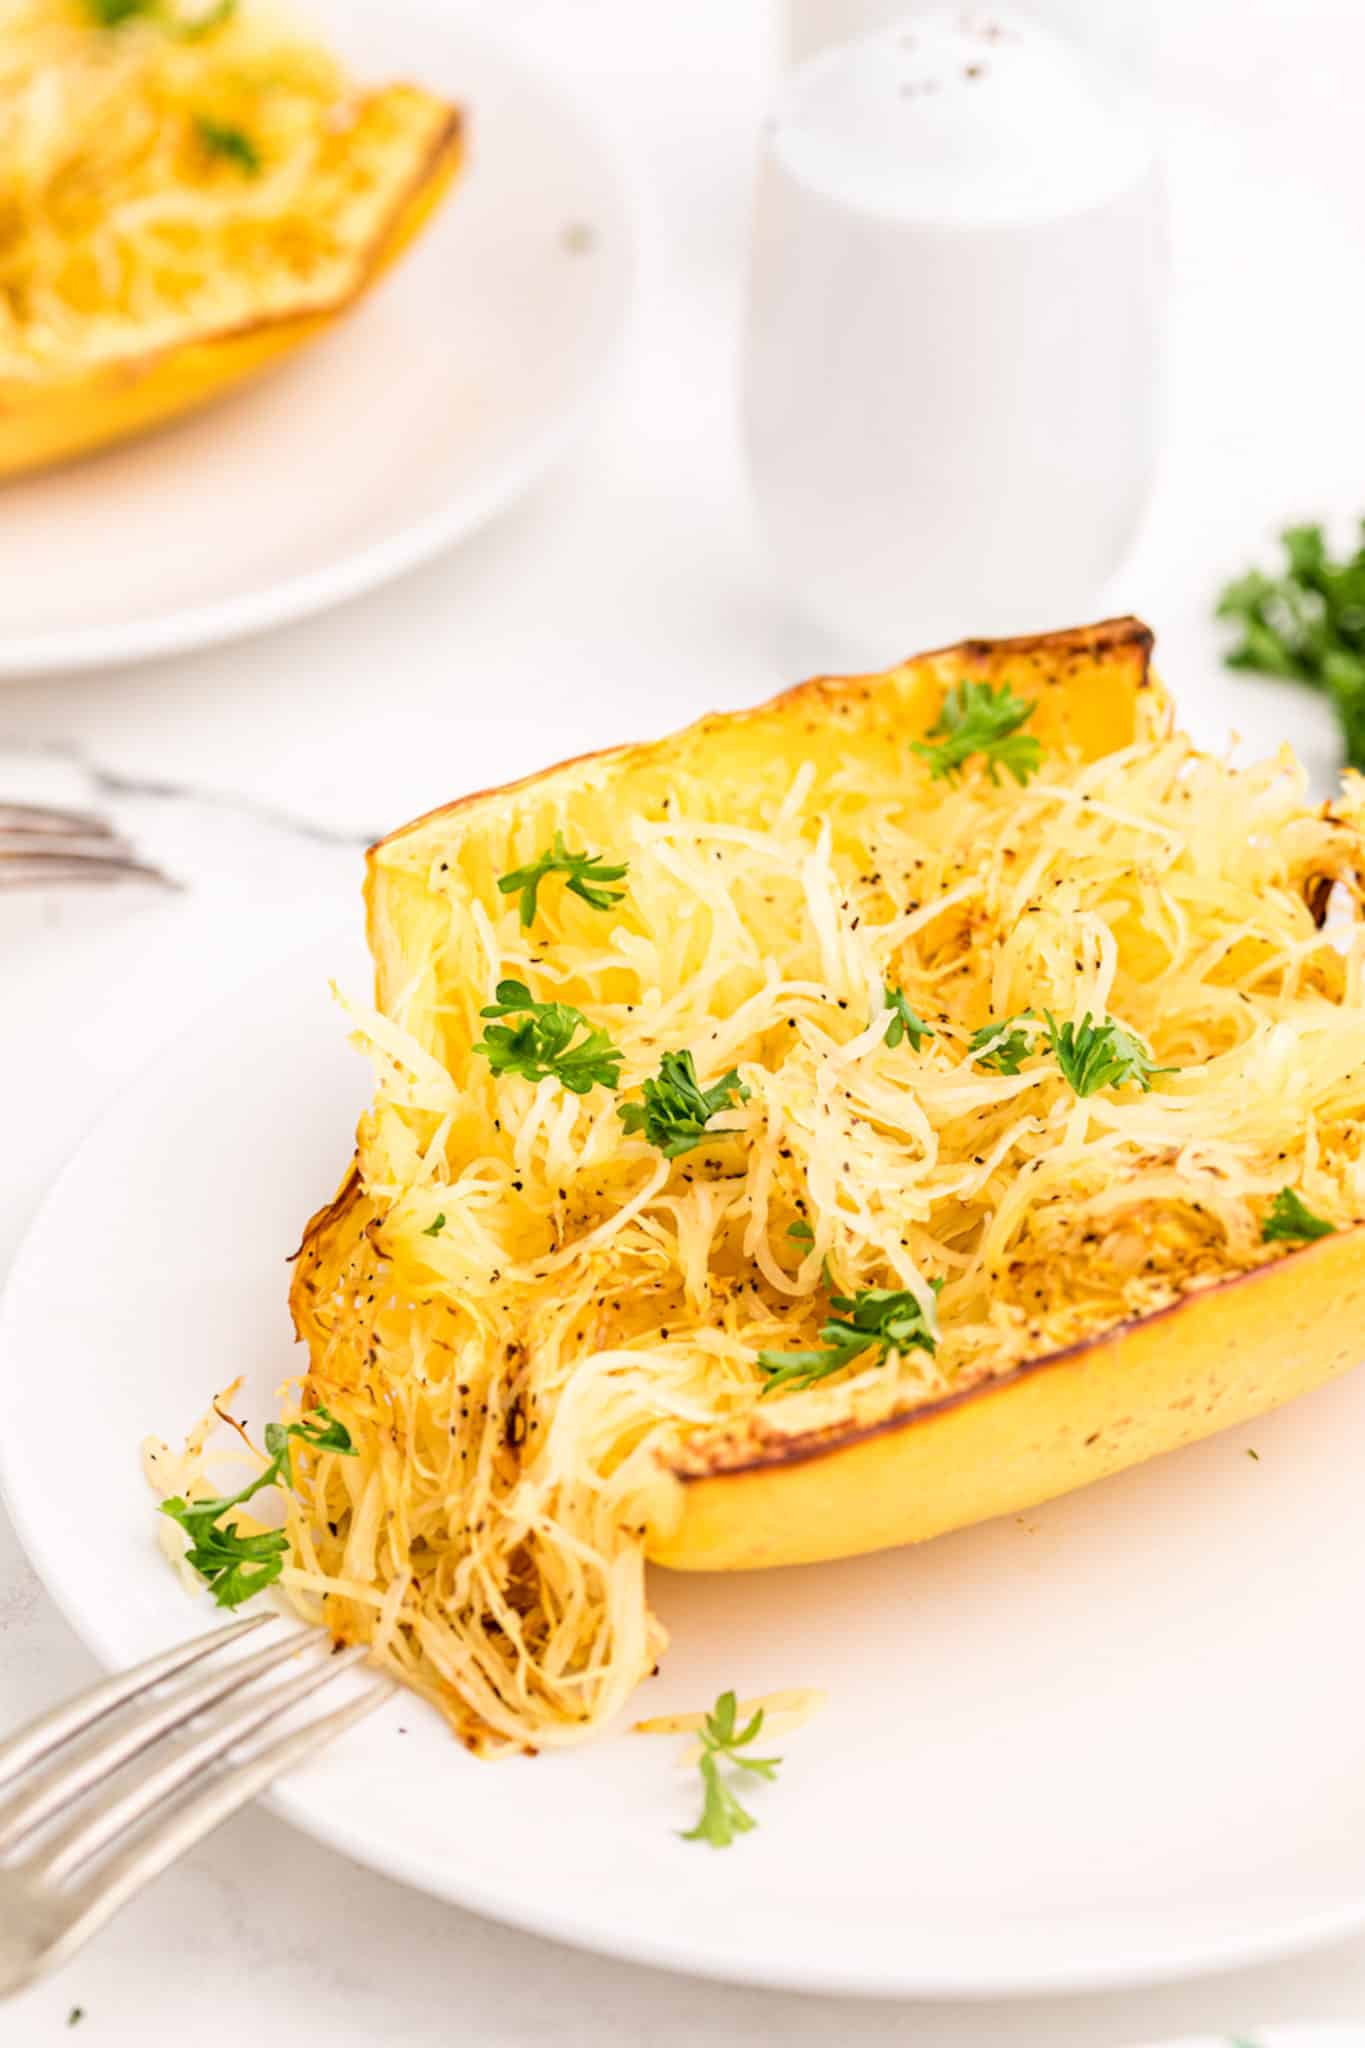 cooked half of a crockpot spaghetti squash on a plate.